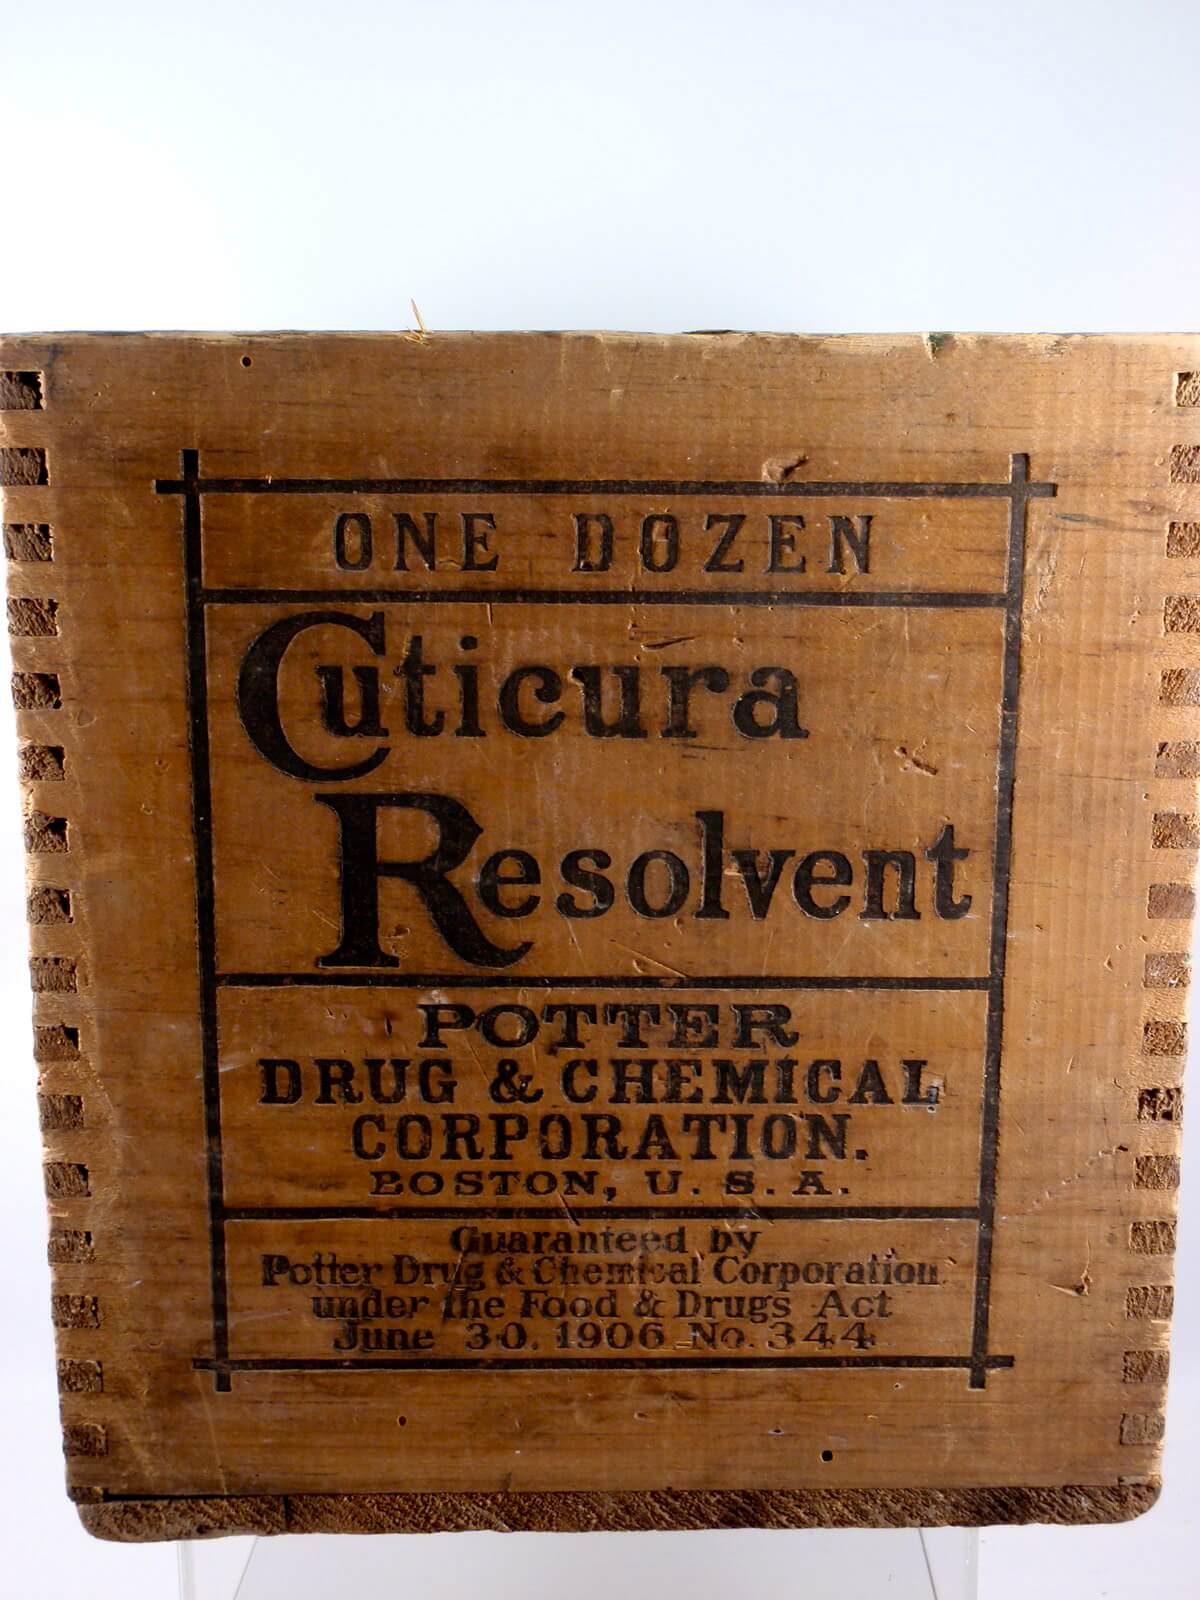 CUTICURA RESOLVENT BLOOD PURIFIER SHIPPING CRATE